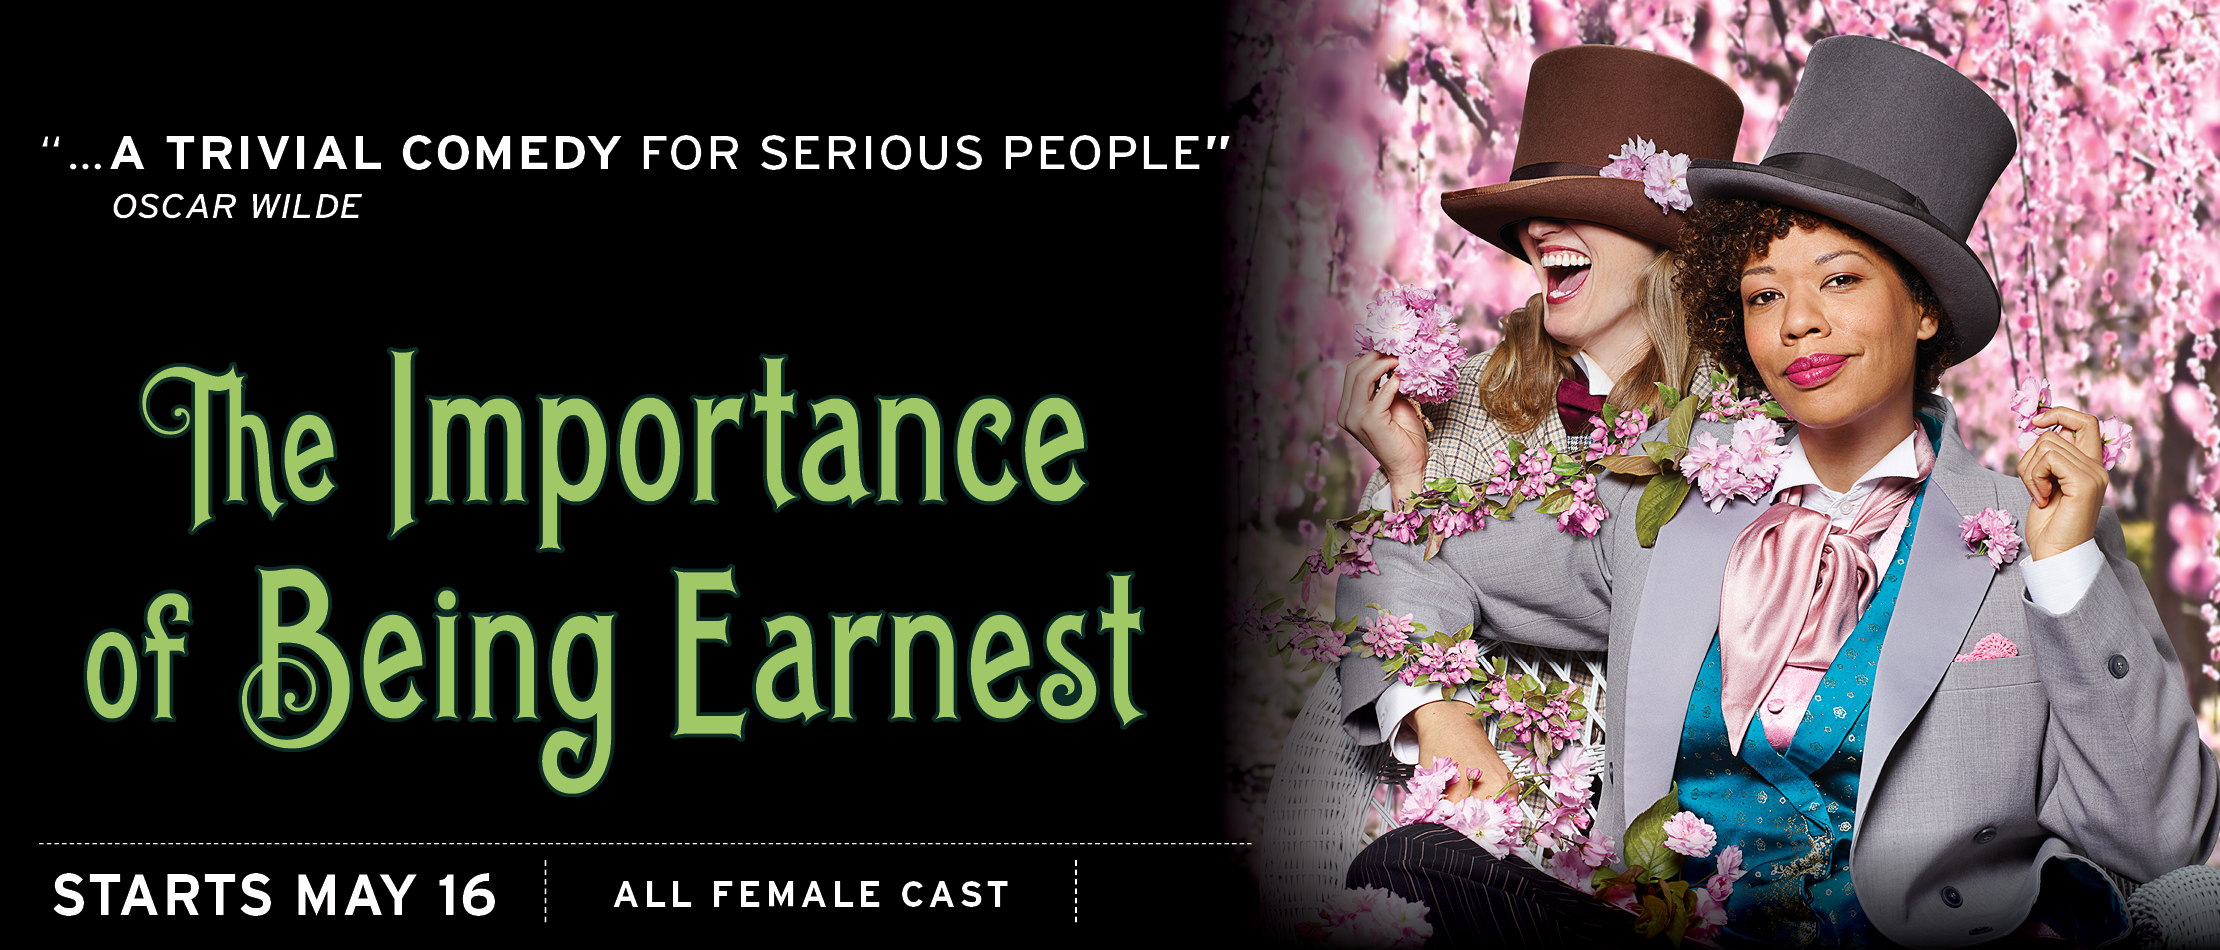 the importance of earnest